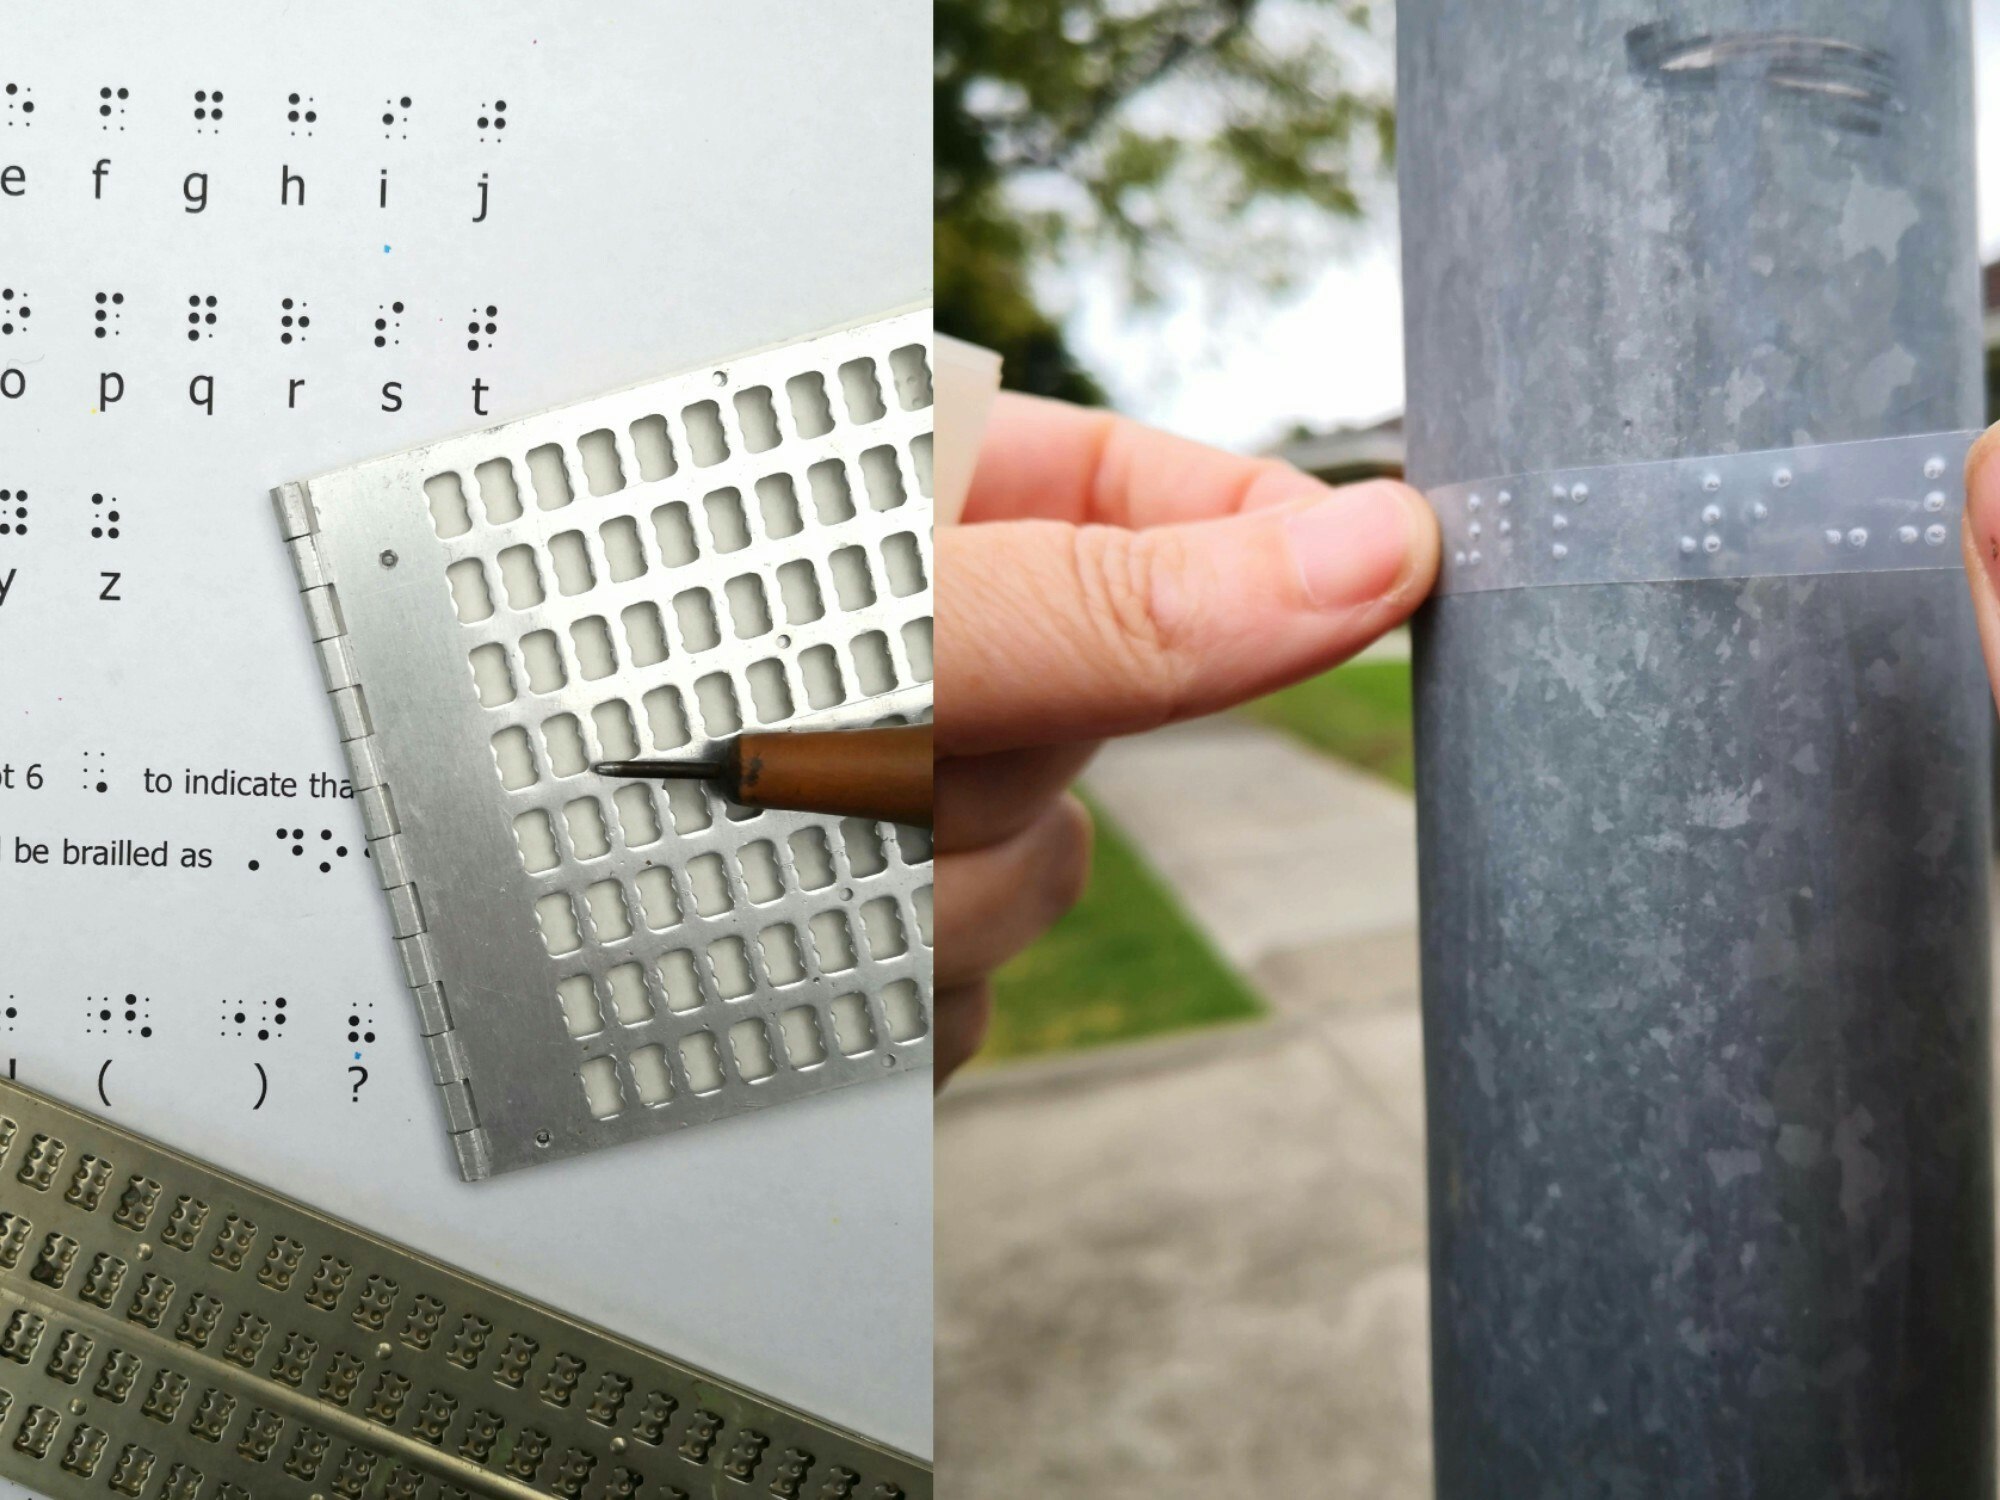 The braille alphabet and braille slates will be used to create accessible labels to place around Melbourne. [Source: Monash University]
